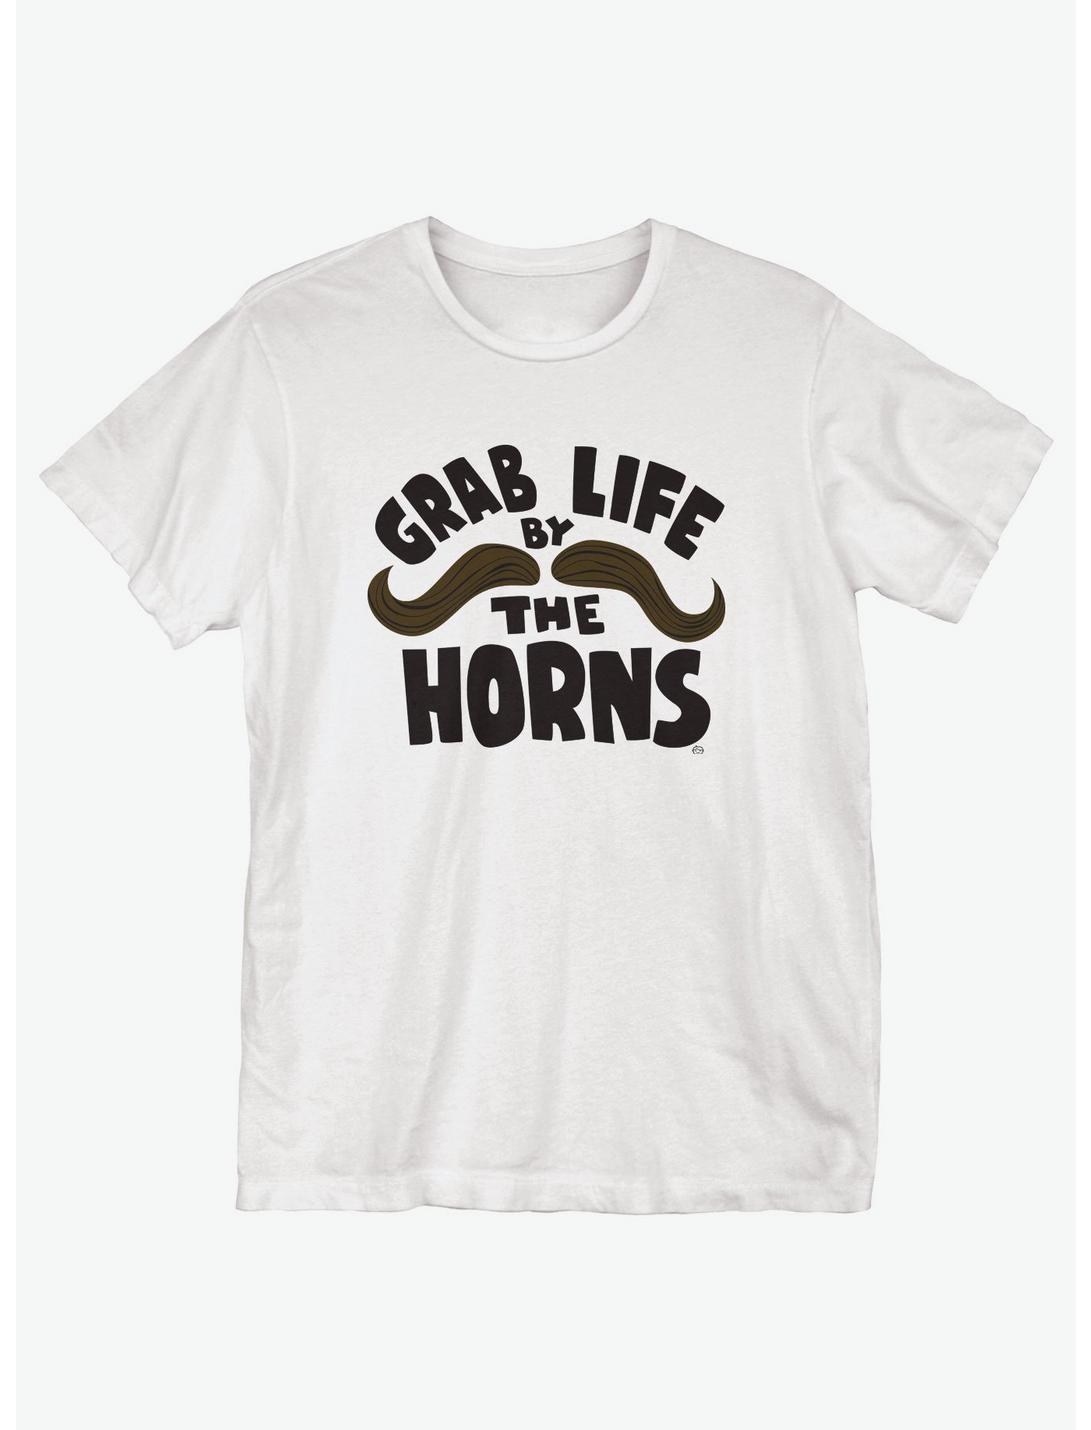 Grab Life By The Horns T-Shirt, WHITE, hi-res